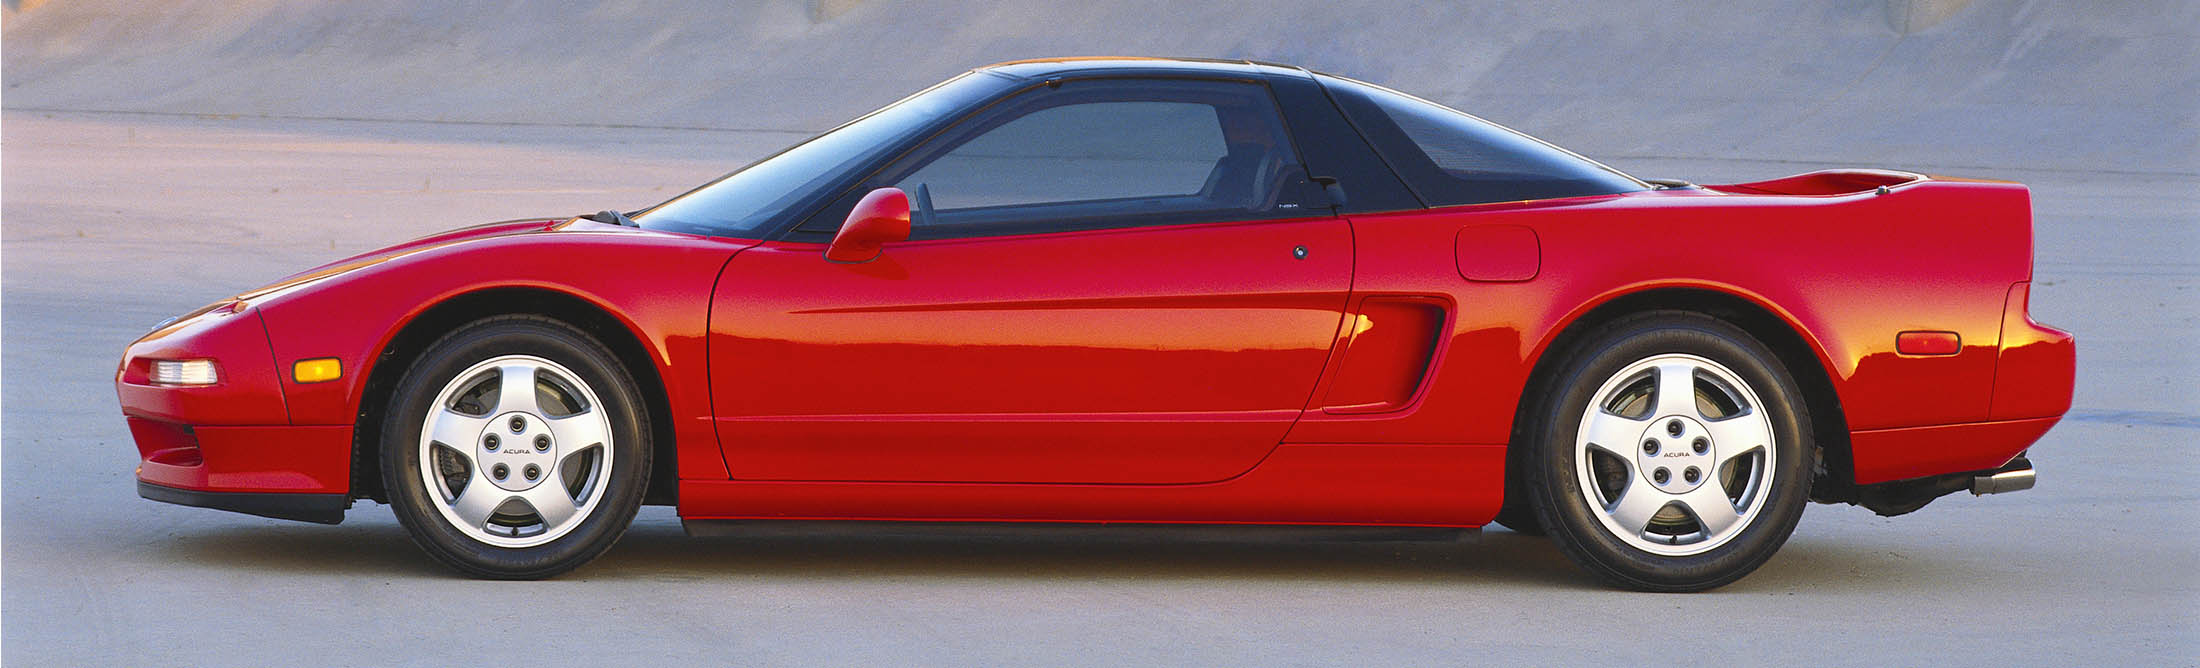 The Classic Acura NSX Is a Better Investment Than the Dow - Bloomberg